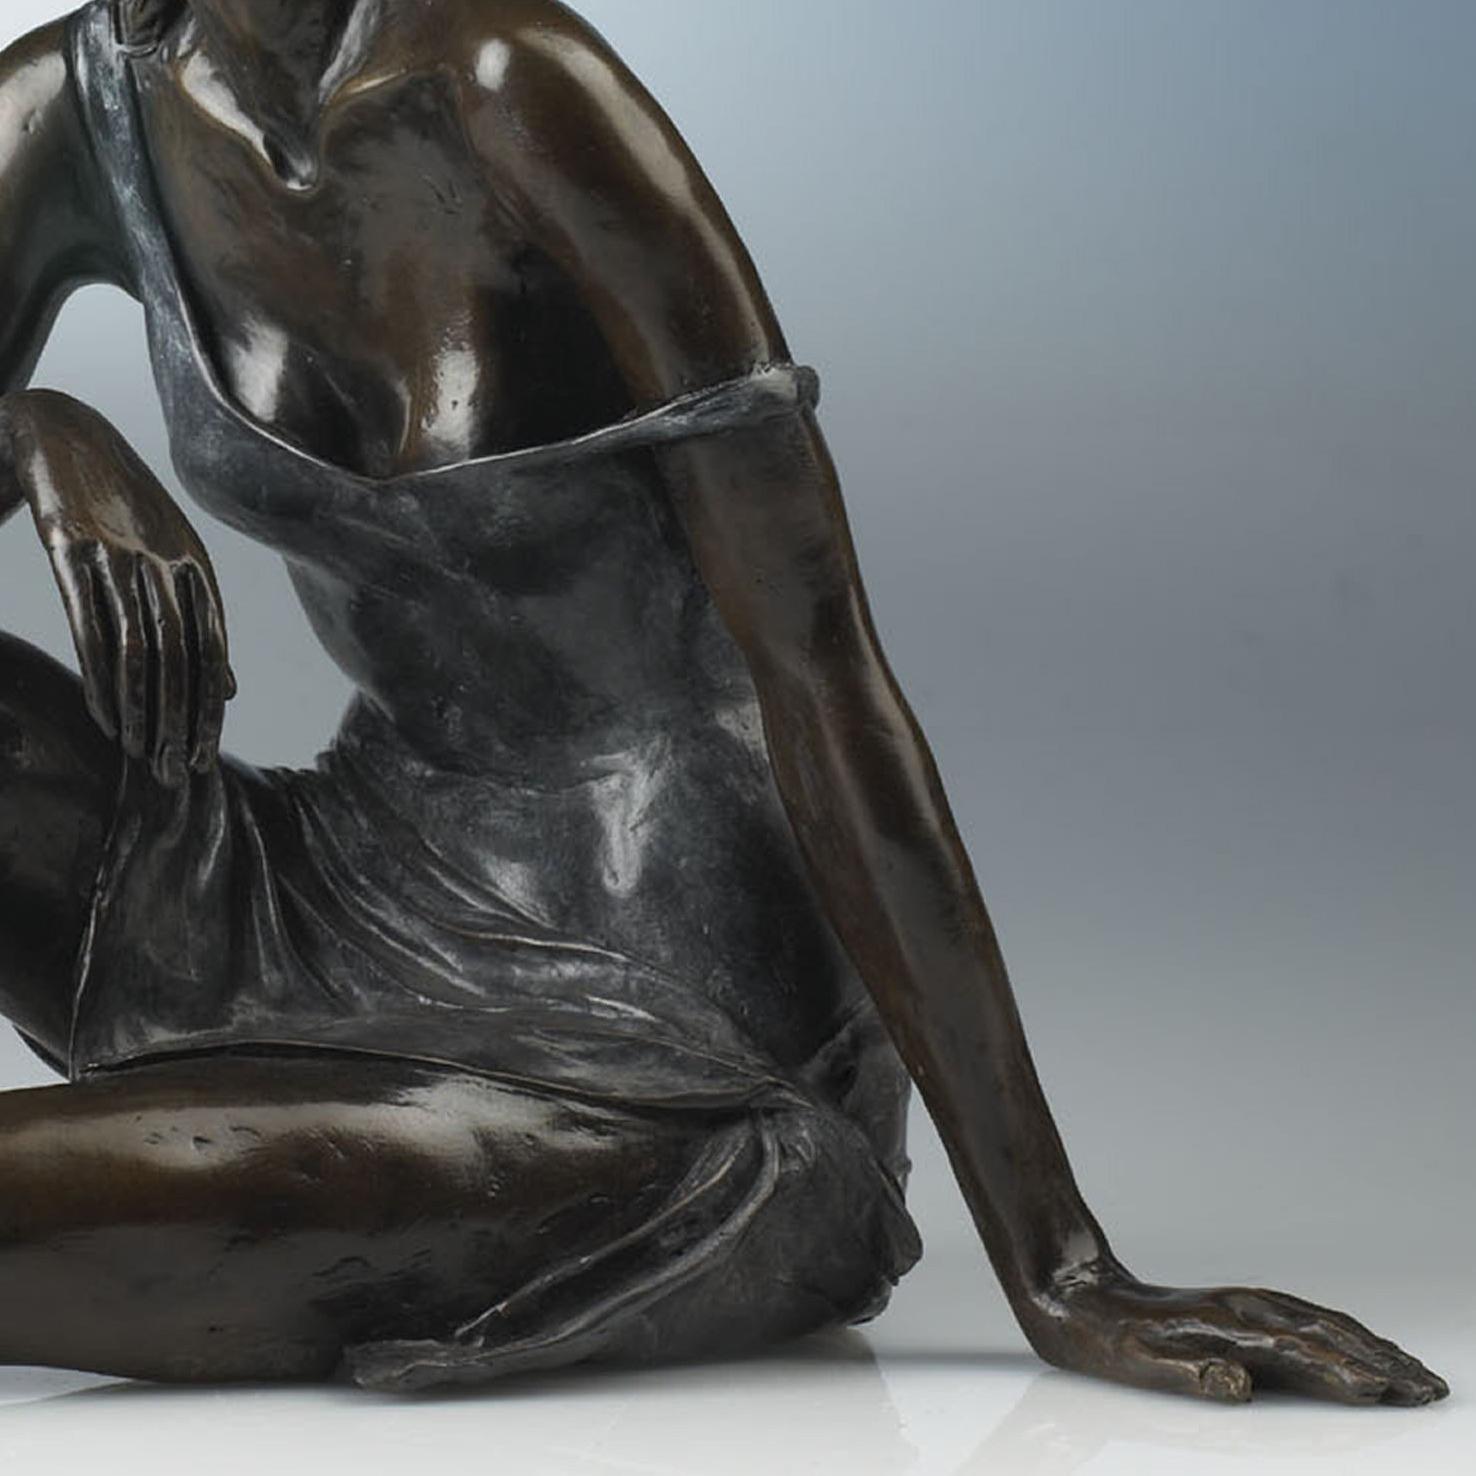 A stunning sculpture of a young ballet dancer 'Repose' by Benson Landes - full of elegance & poise. 

For Benson Landes, sculpture was most definitely a passion. His oeuvre of cast bronzes is populated with ‘off duty’ ballet dancers, rather wistful